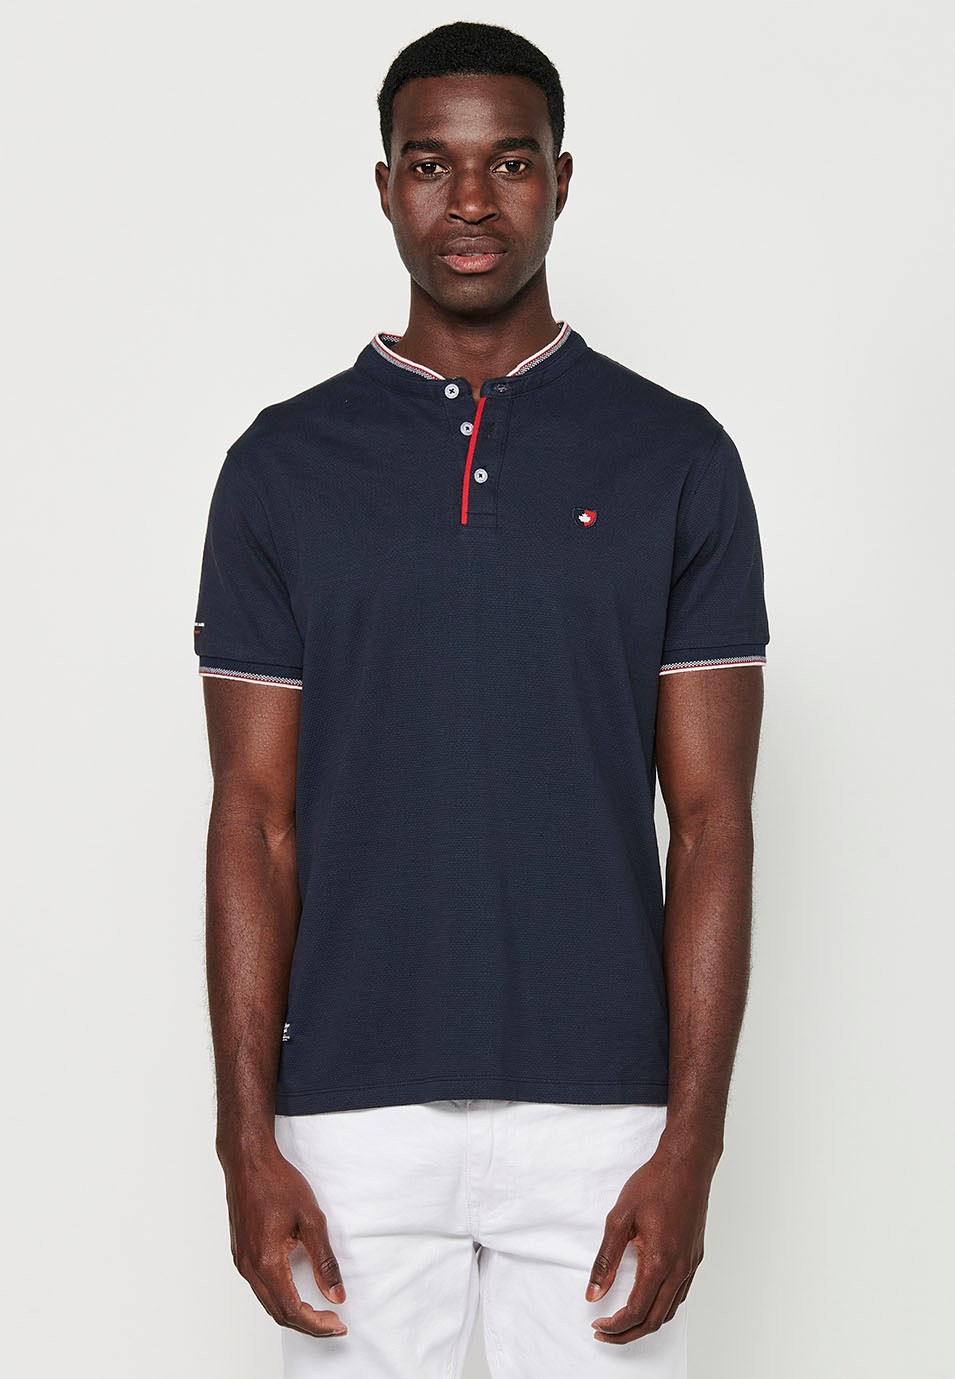 Short-sleeved cotton polo shirt with ribbed finish with round neck, buttoned opening and textured side slits in Navy Color for Men 4